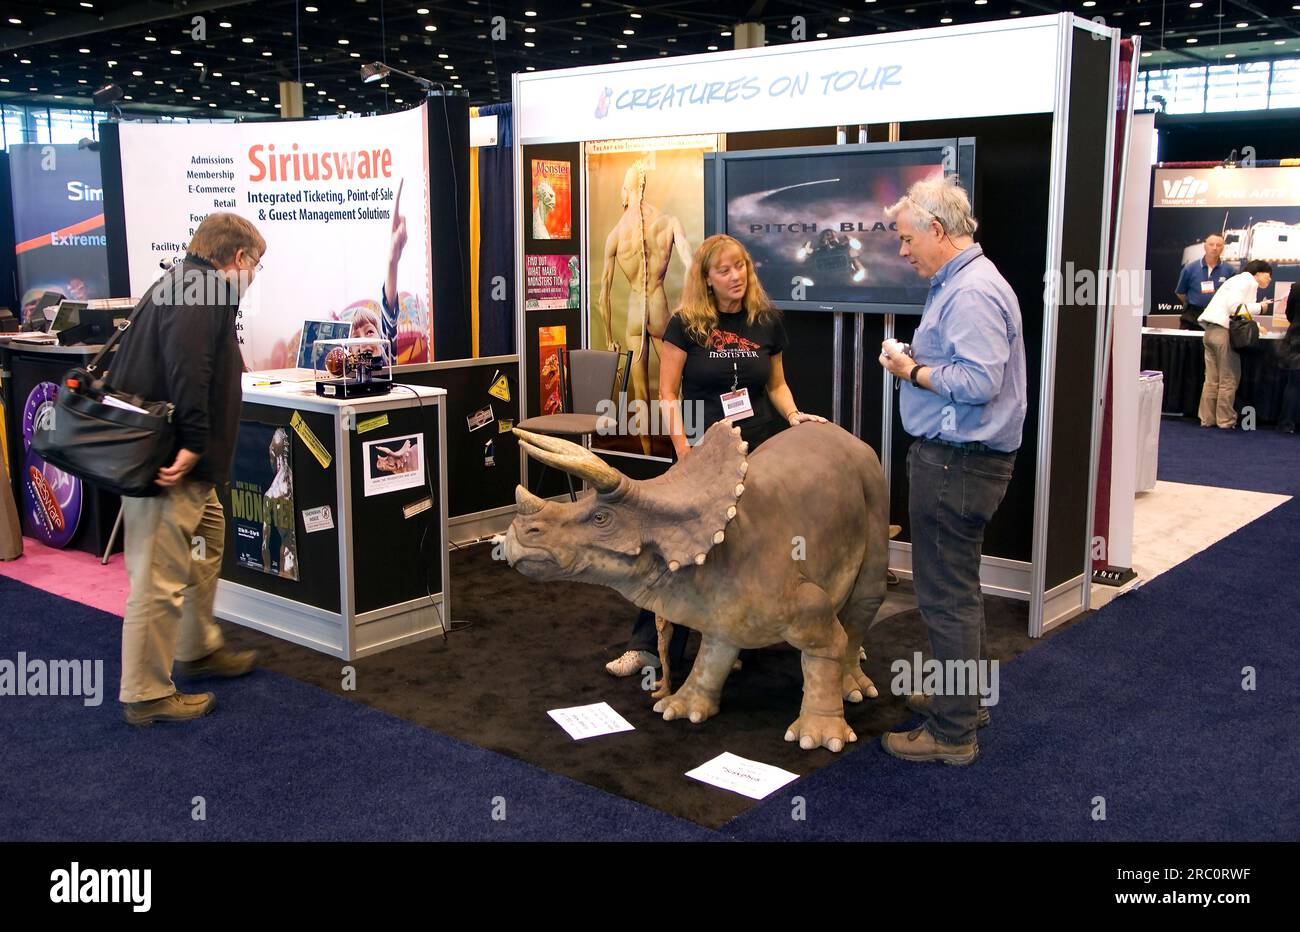 Museum Exhibitors convention at the Chicago Convention Center, Chicago, Illinois Stock Photo